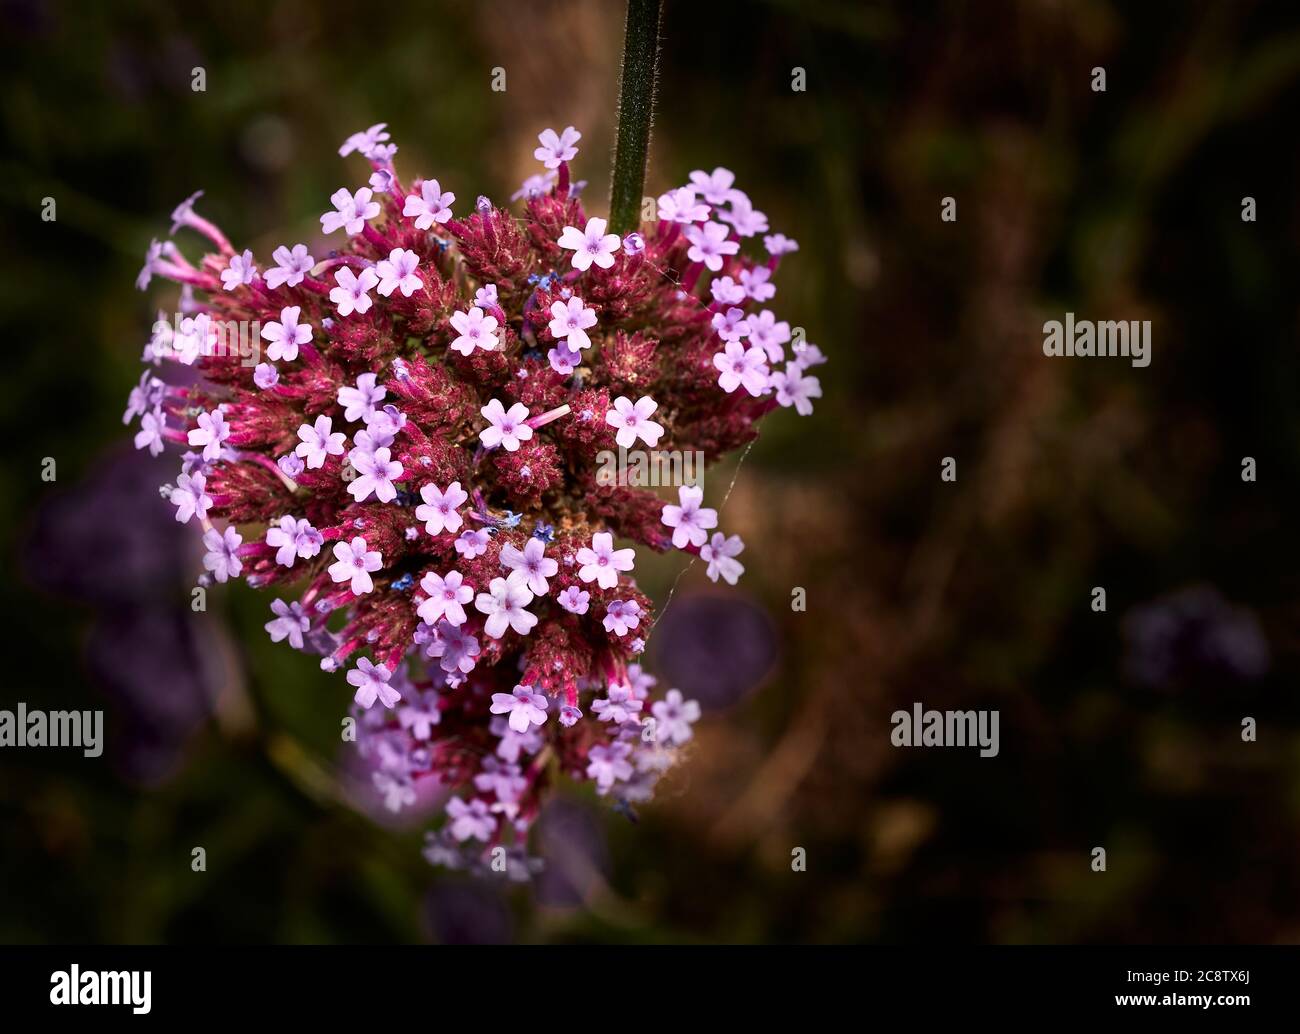 A cluster of small violet flowers on the head of a Veined Verbena (Verbena rigida) plant. Stock Photo